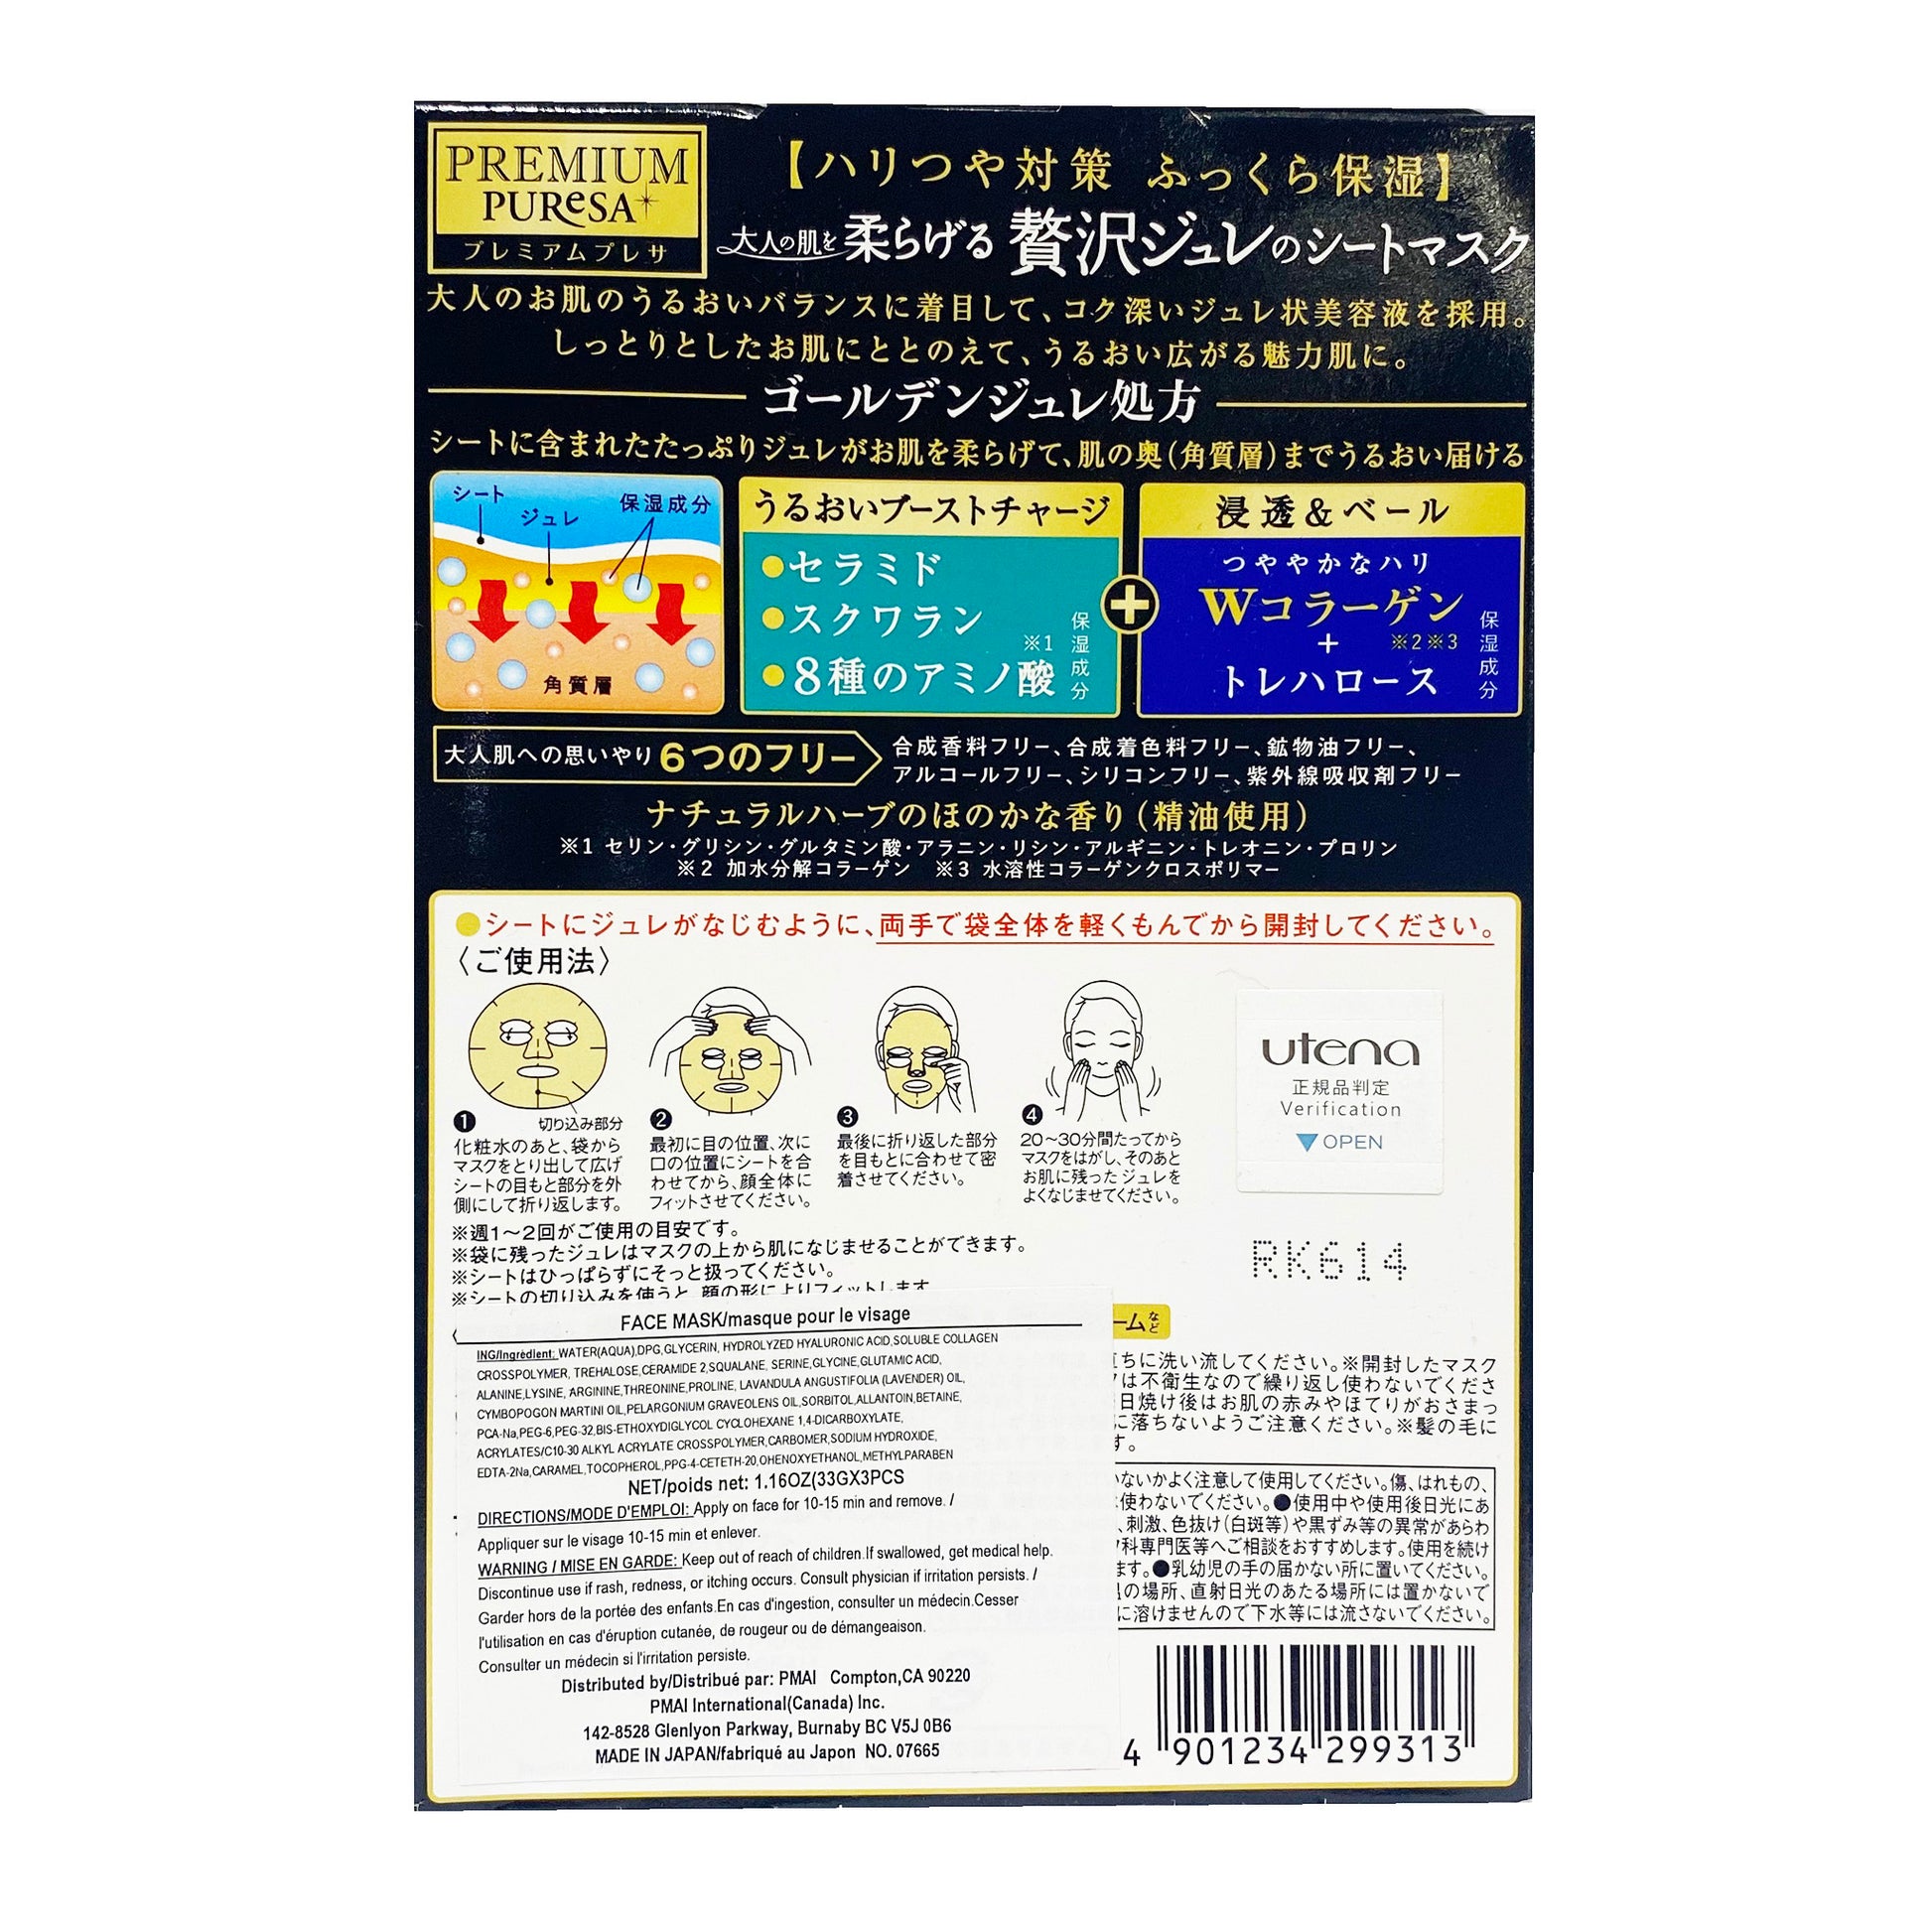 Back graphic view of Uthena Premium Puresa Pure collagen Excellent Facial Sheet Mask 1.16oz